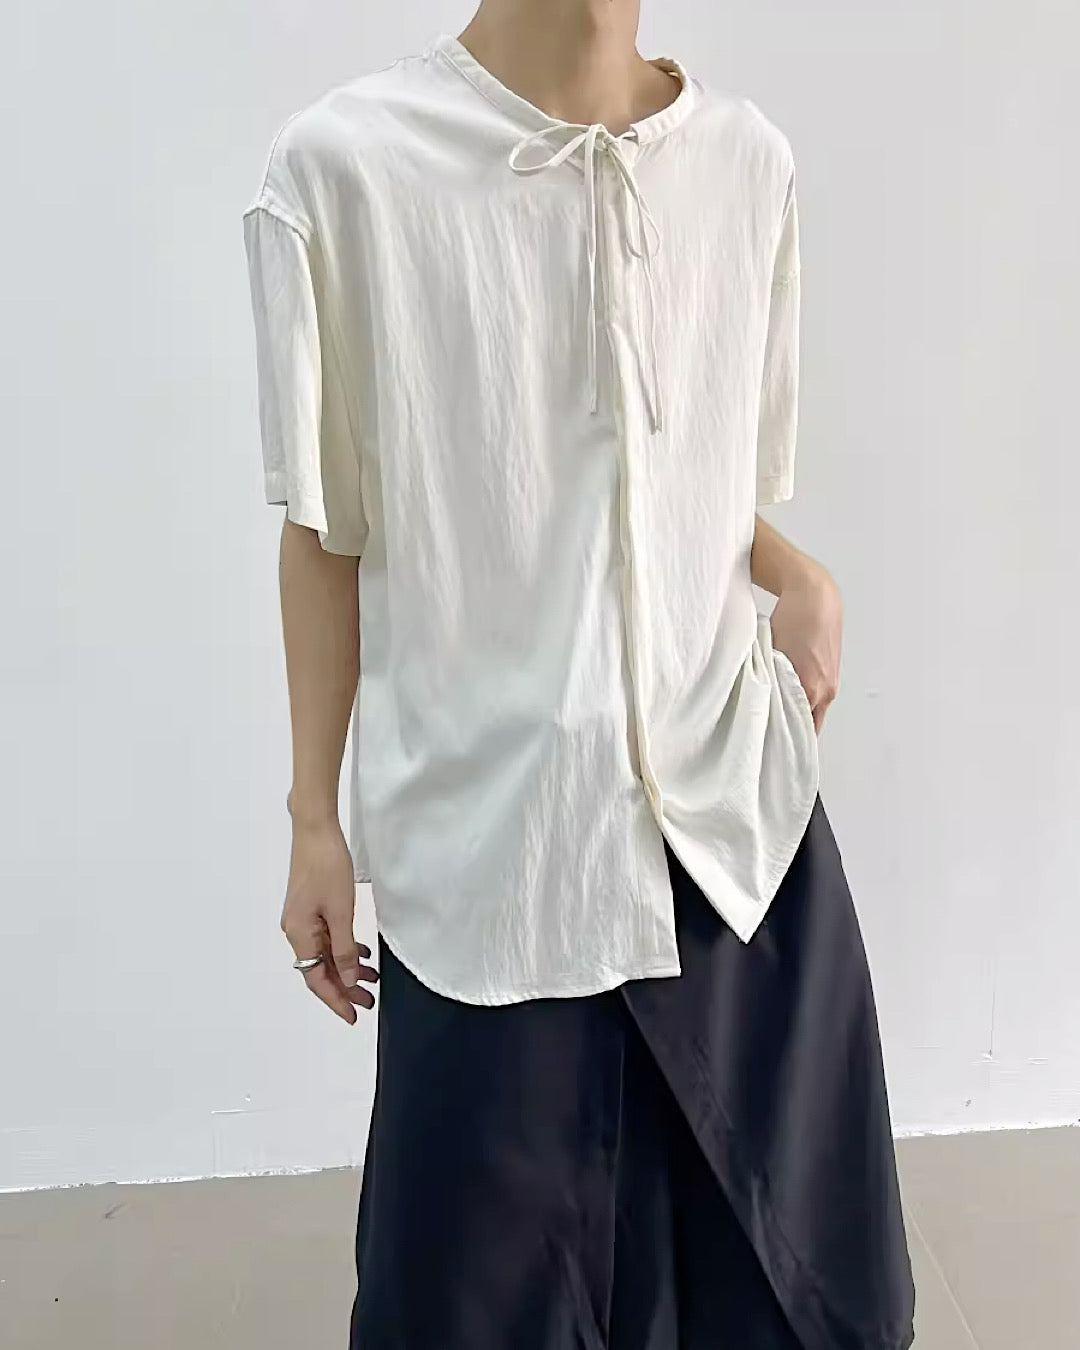 【Yghome】Simple rayon type simple casual shirt  YH0007